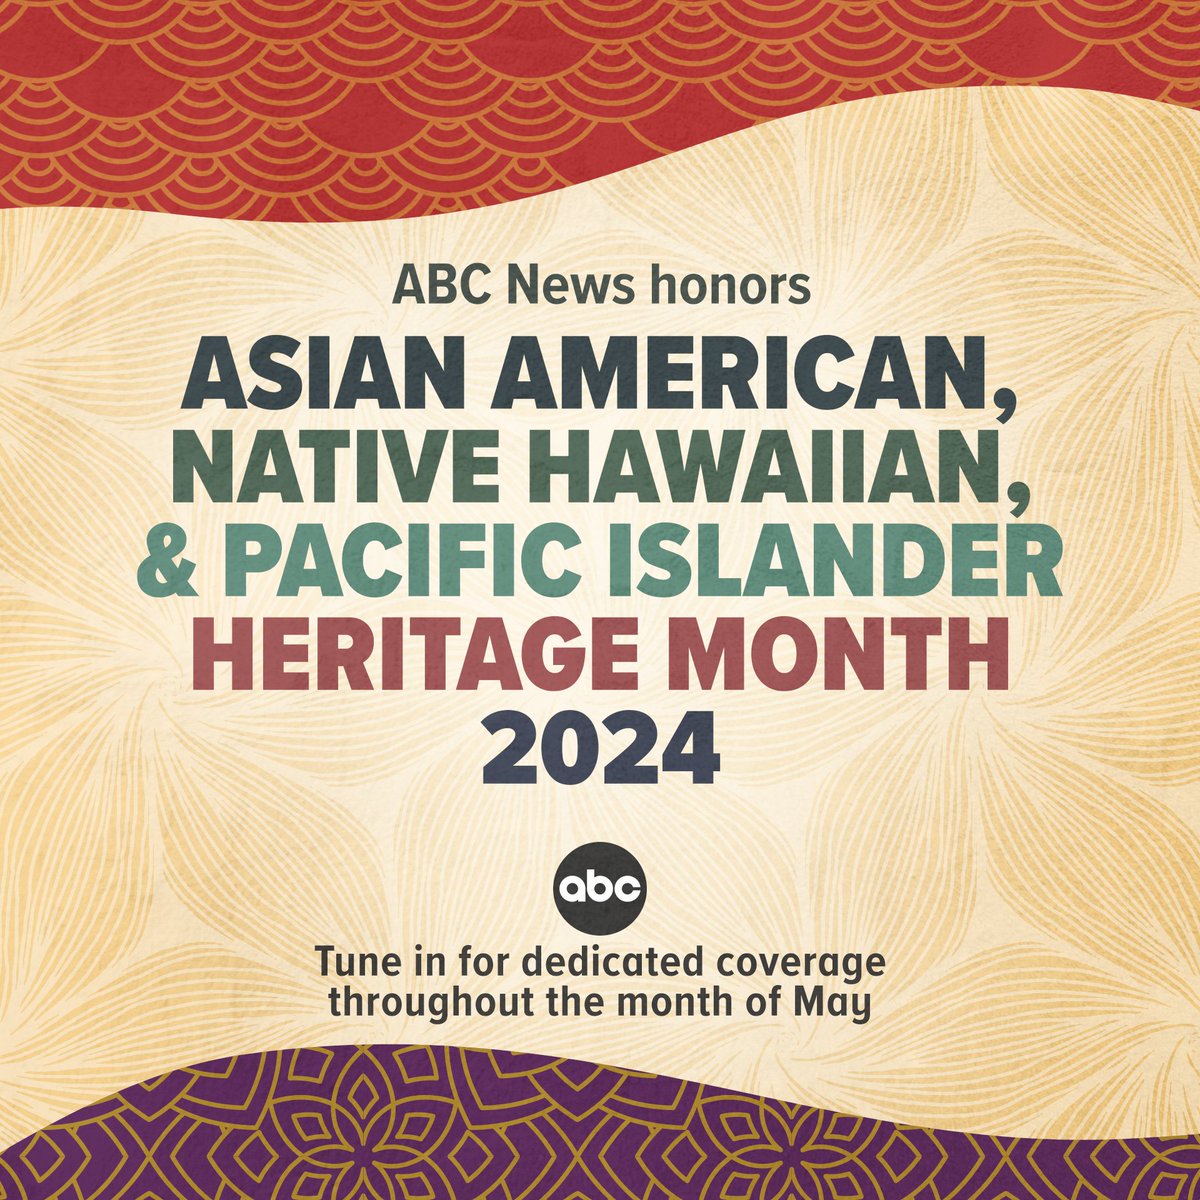 ABC News is proud to celebrate Asian American, Native Hawaiian, & Pacific Islander heritage all month long. Tune in the whole month of May for special coverage celebrating #AANHPIMonth.

Learn more: dgepress.com/abcnews/pressr…